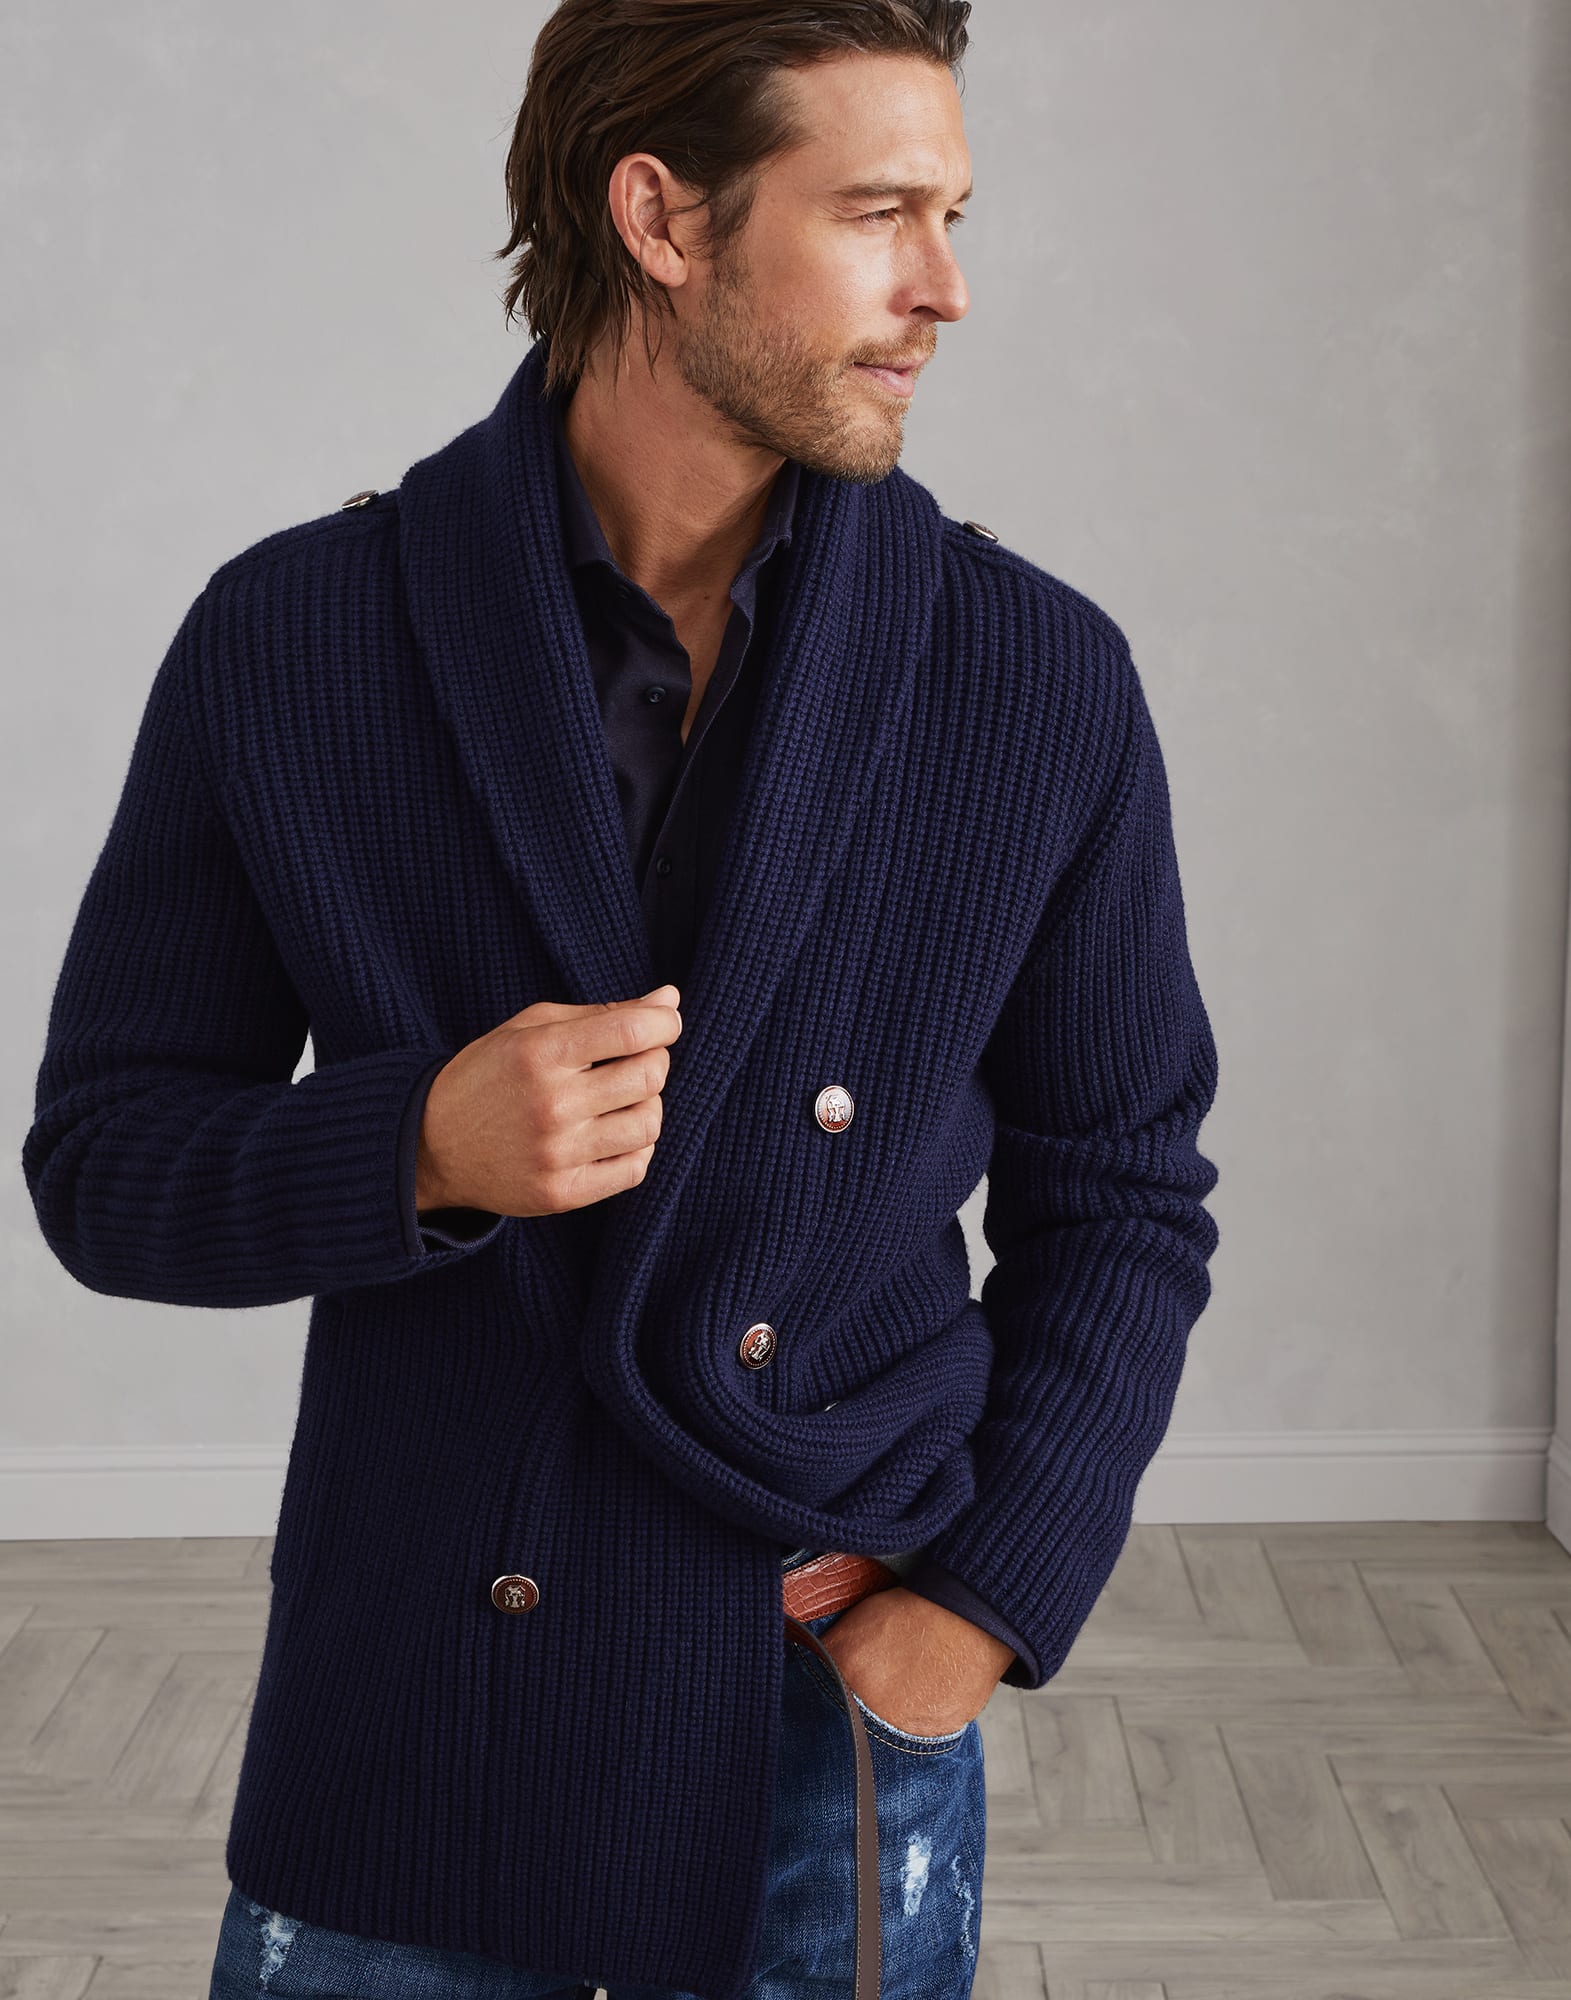 Cardigan with metal buttons